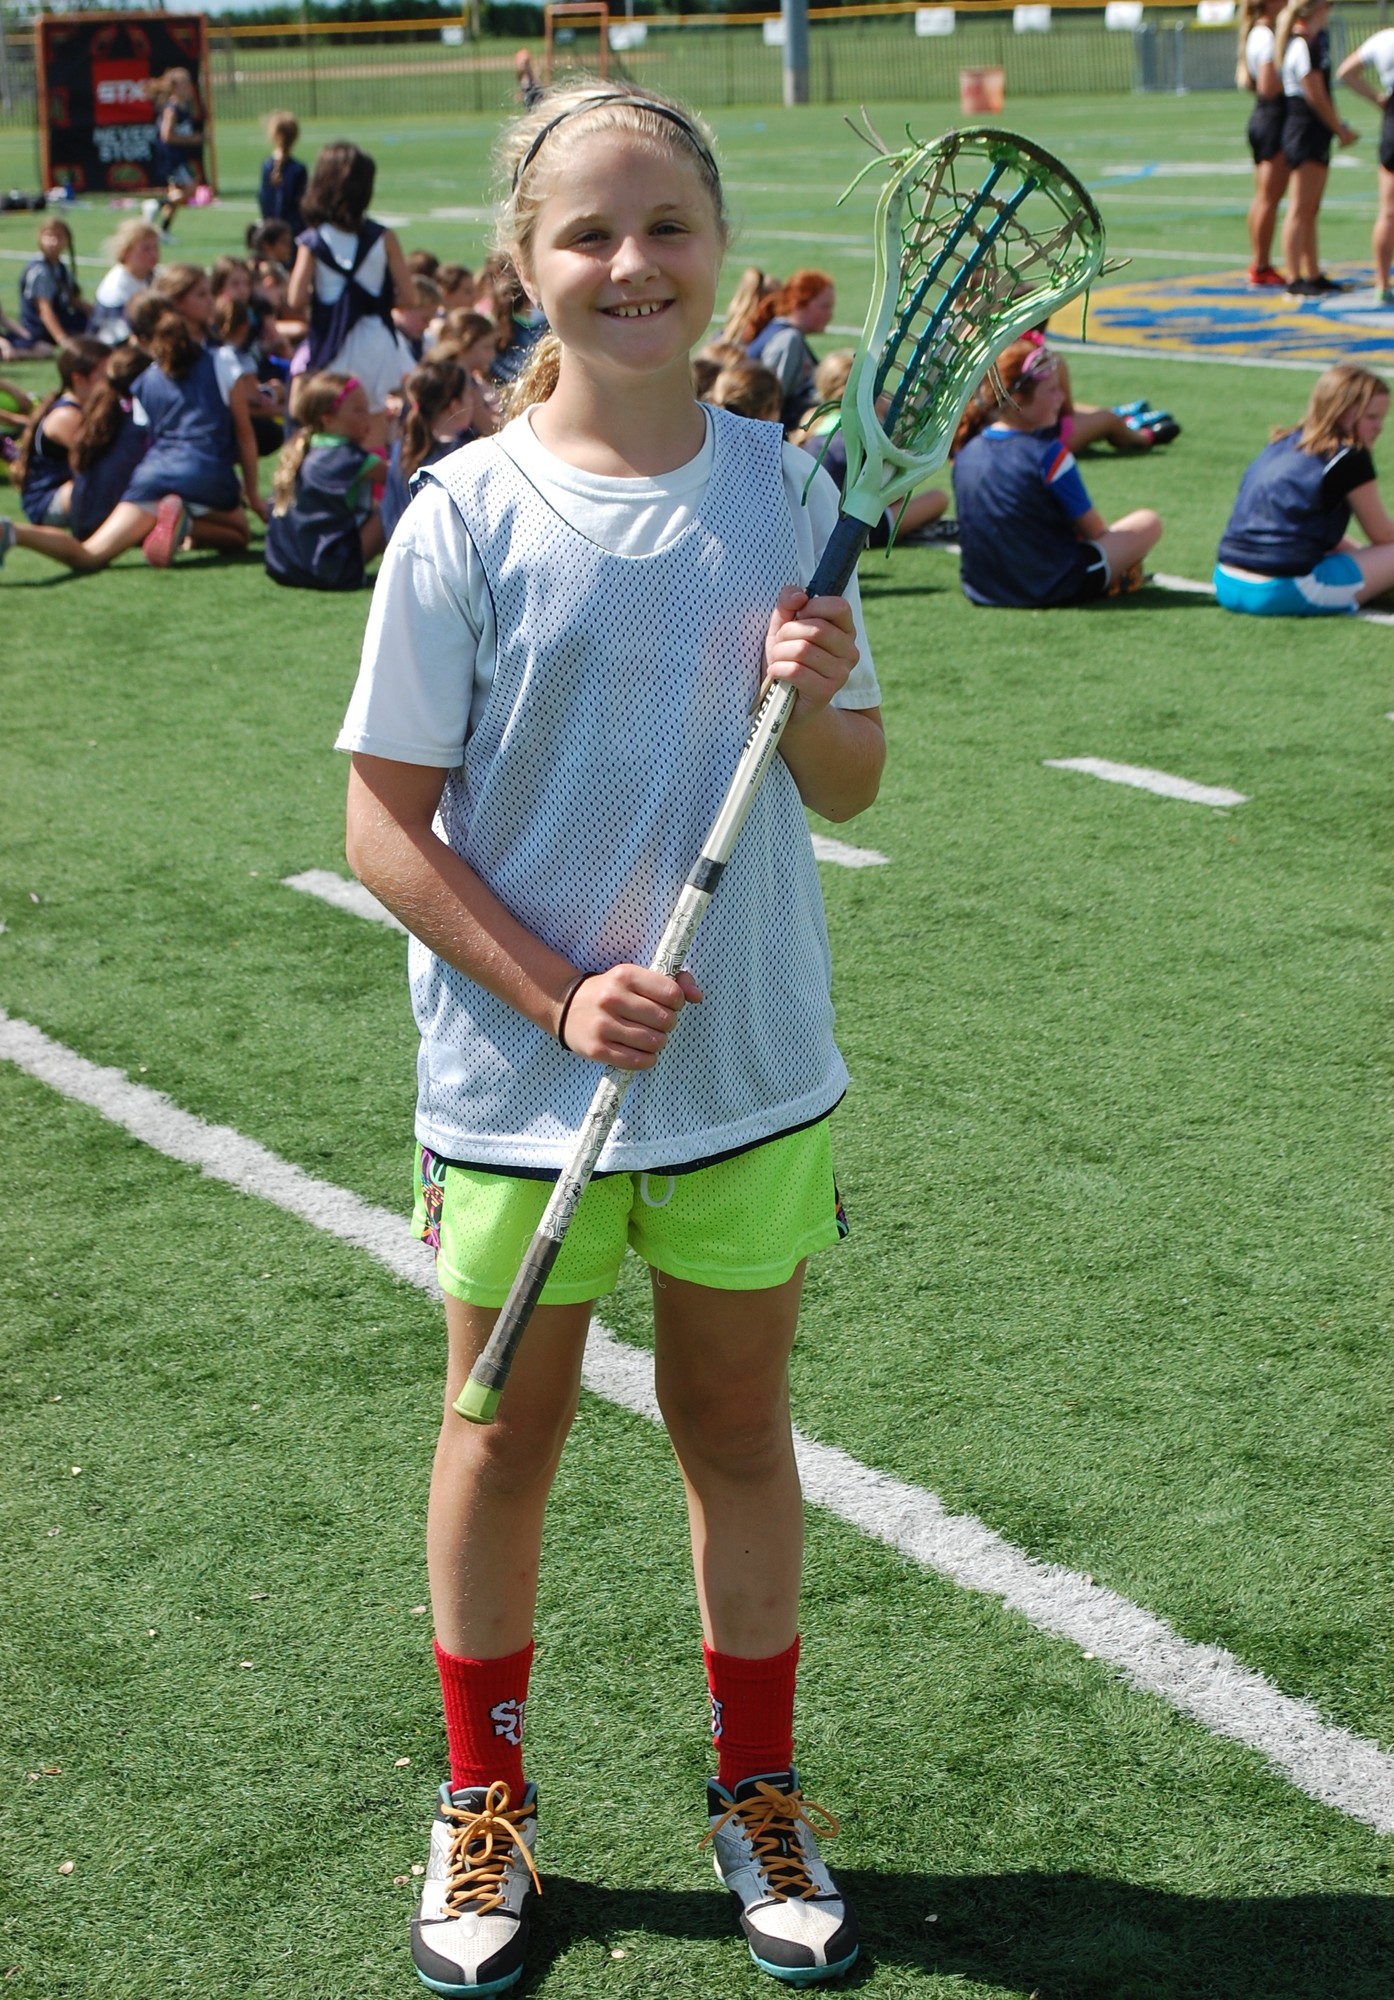 Alexandra Leggio, of Seaford, is a regular at the lacrosse clinic.